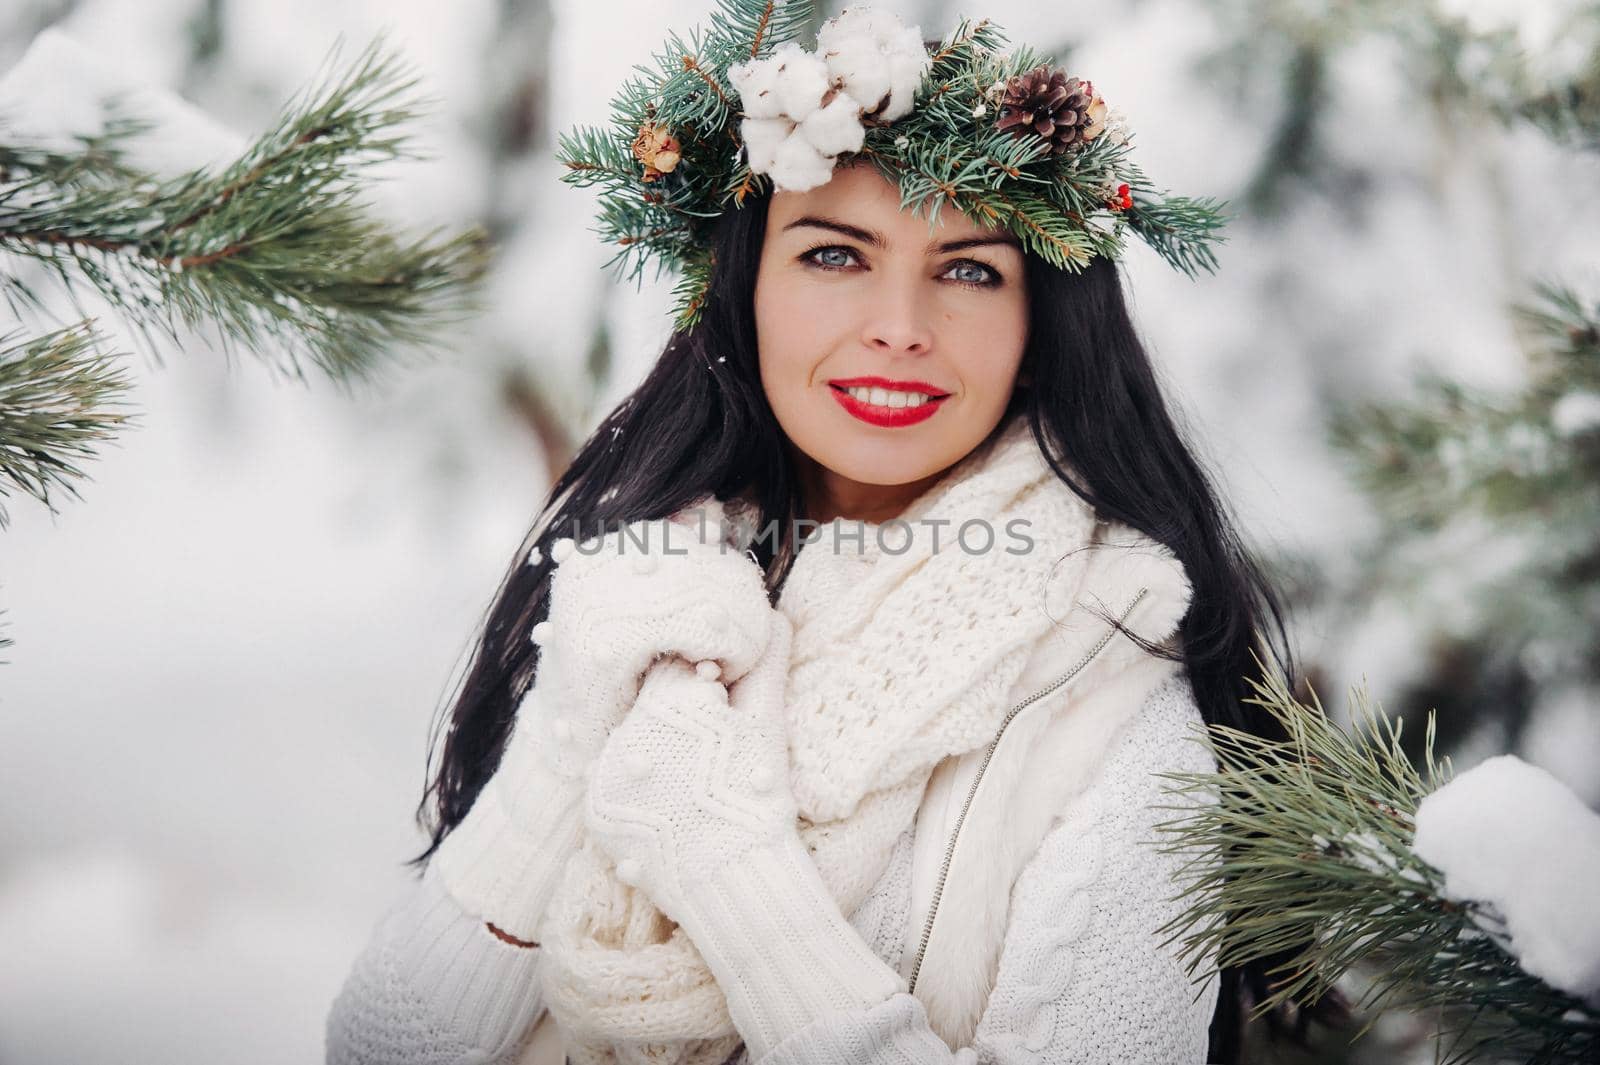 Portrait of a woman in white clothes in a cold winter forest. Girl with a wreath on her head in a snow-covered winter forest.